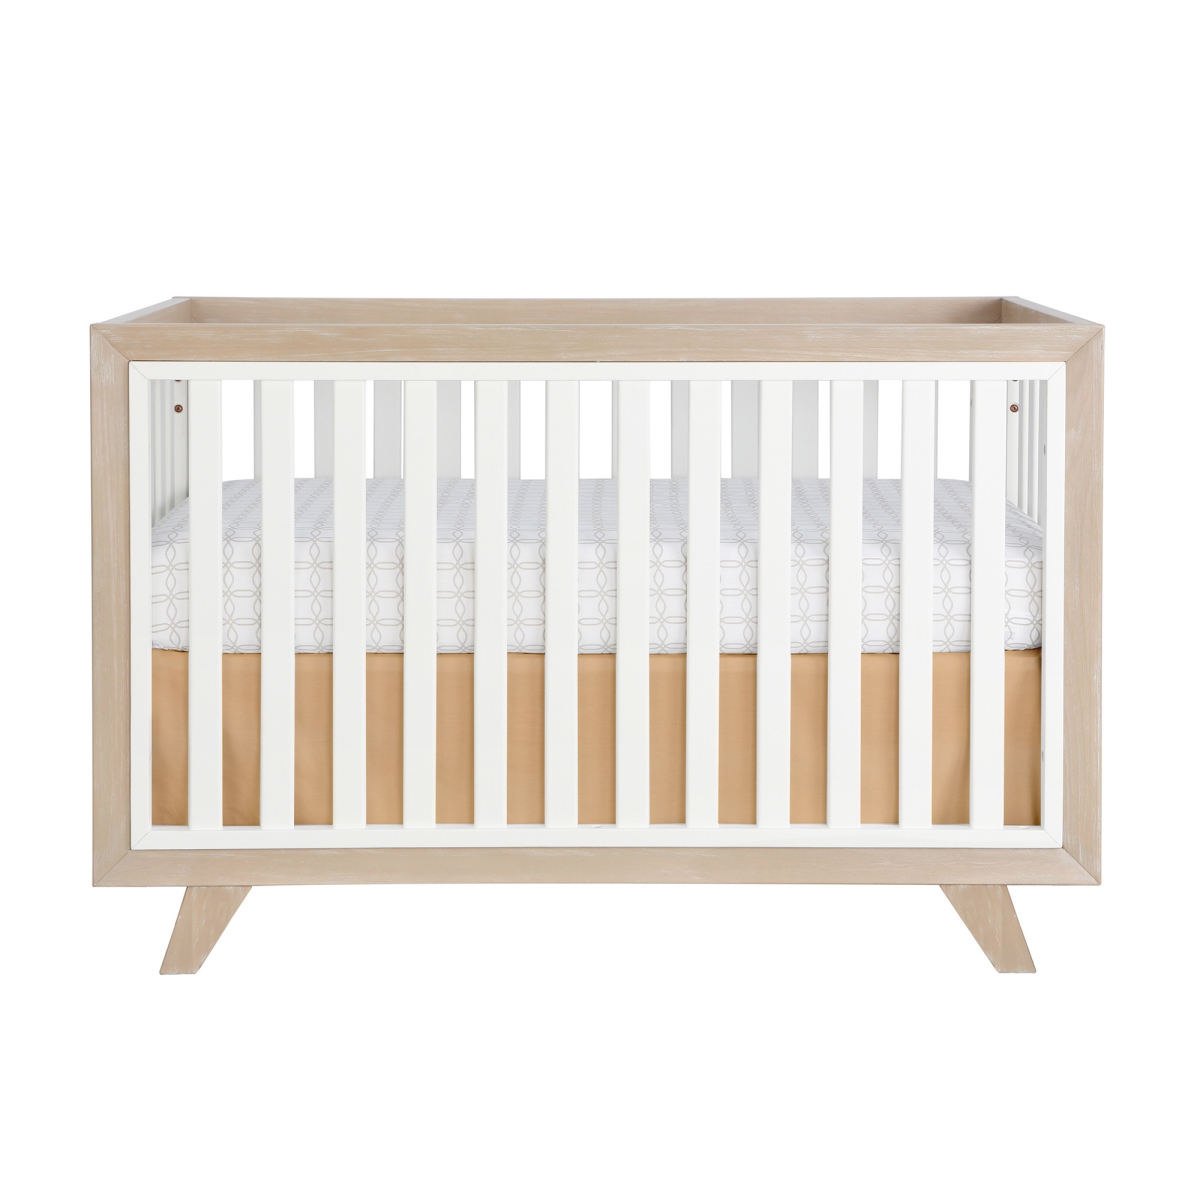 Second Story Home  268-174-0123 Wooster Two Tone Crib  Almond &amp; White